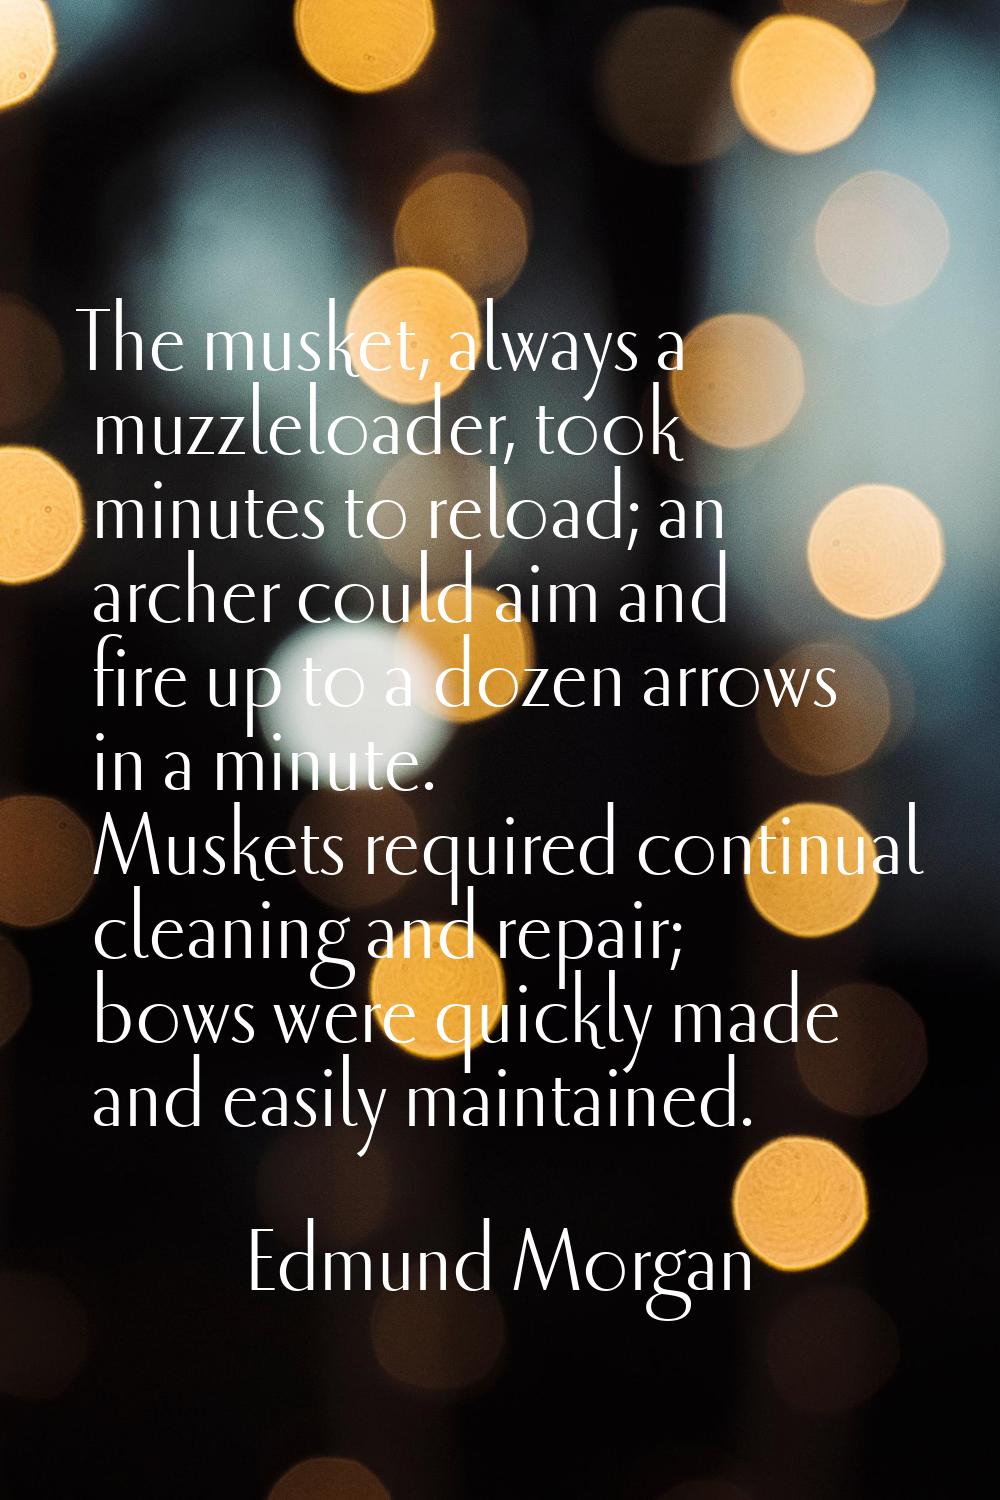 The musket, always a muzzleloader, took minutes to reload; an archer could aim and fire up to a doz